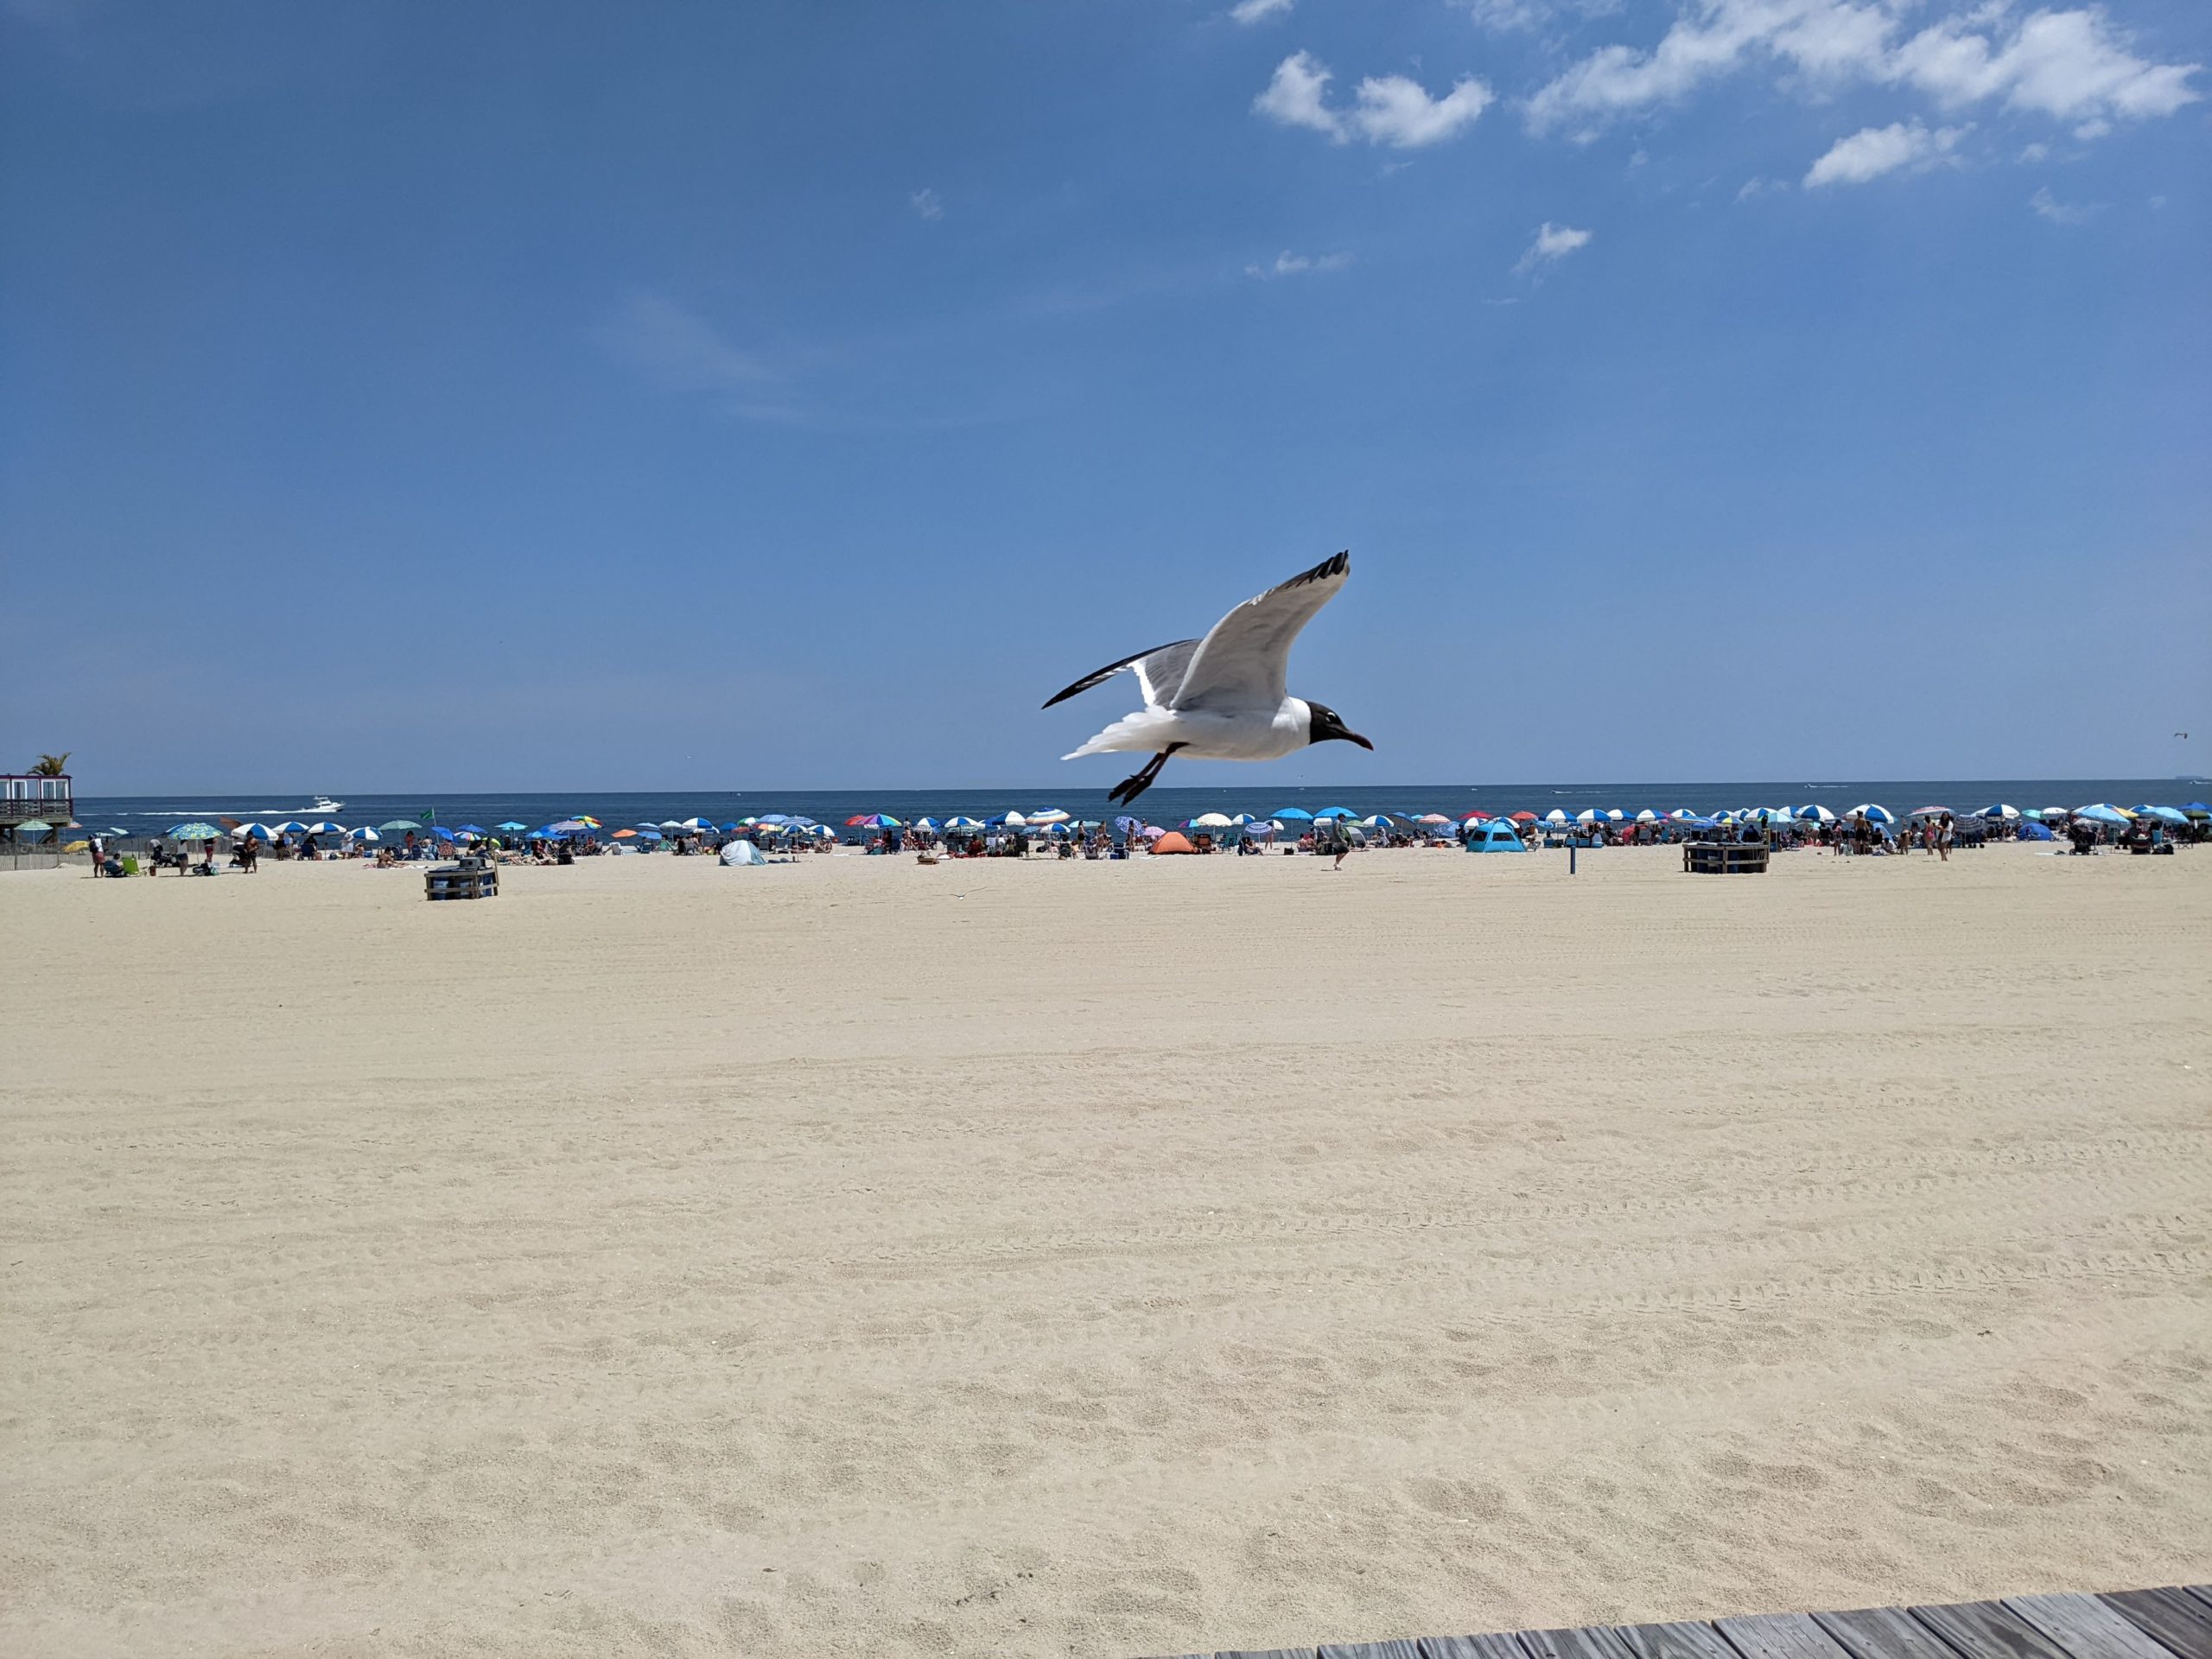 seagull flying in blue sky over white beach and crowd of beach umbrellas against the ocean horizon line